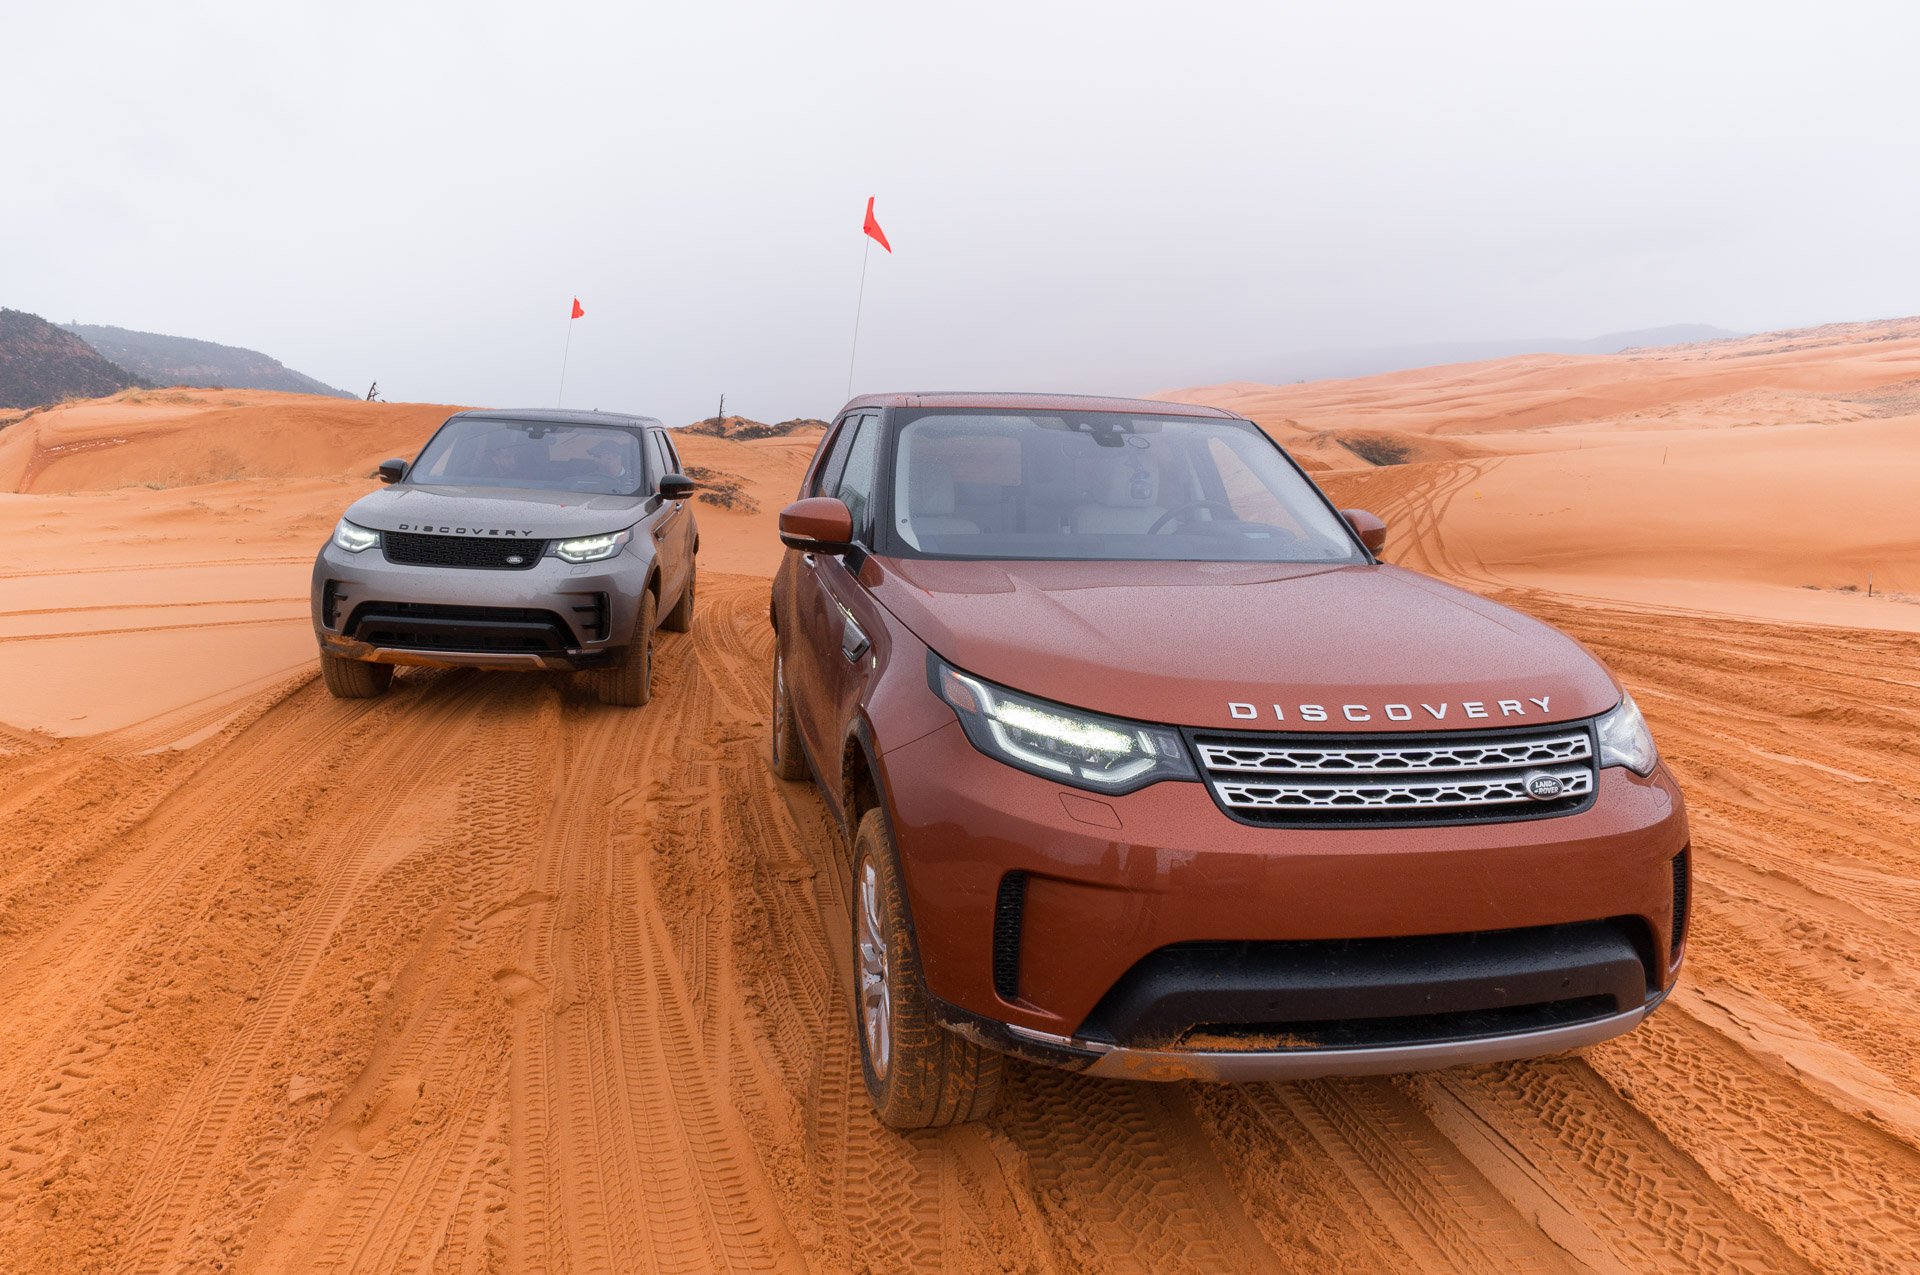 2017 Land Rover Discovery: The New King of the SUV Hill